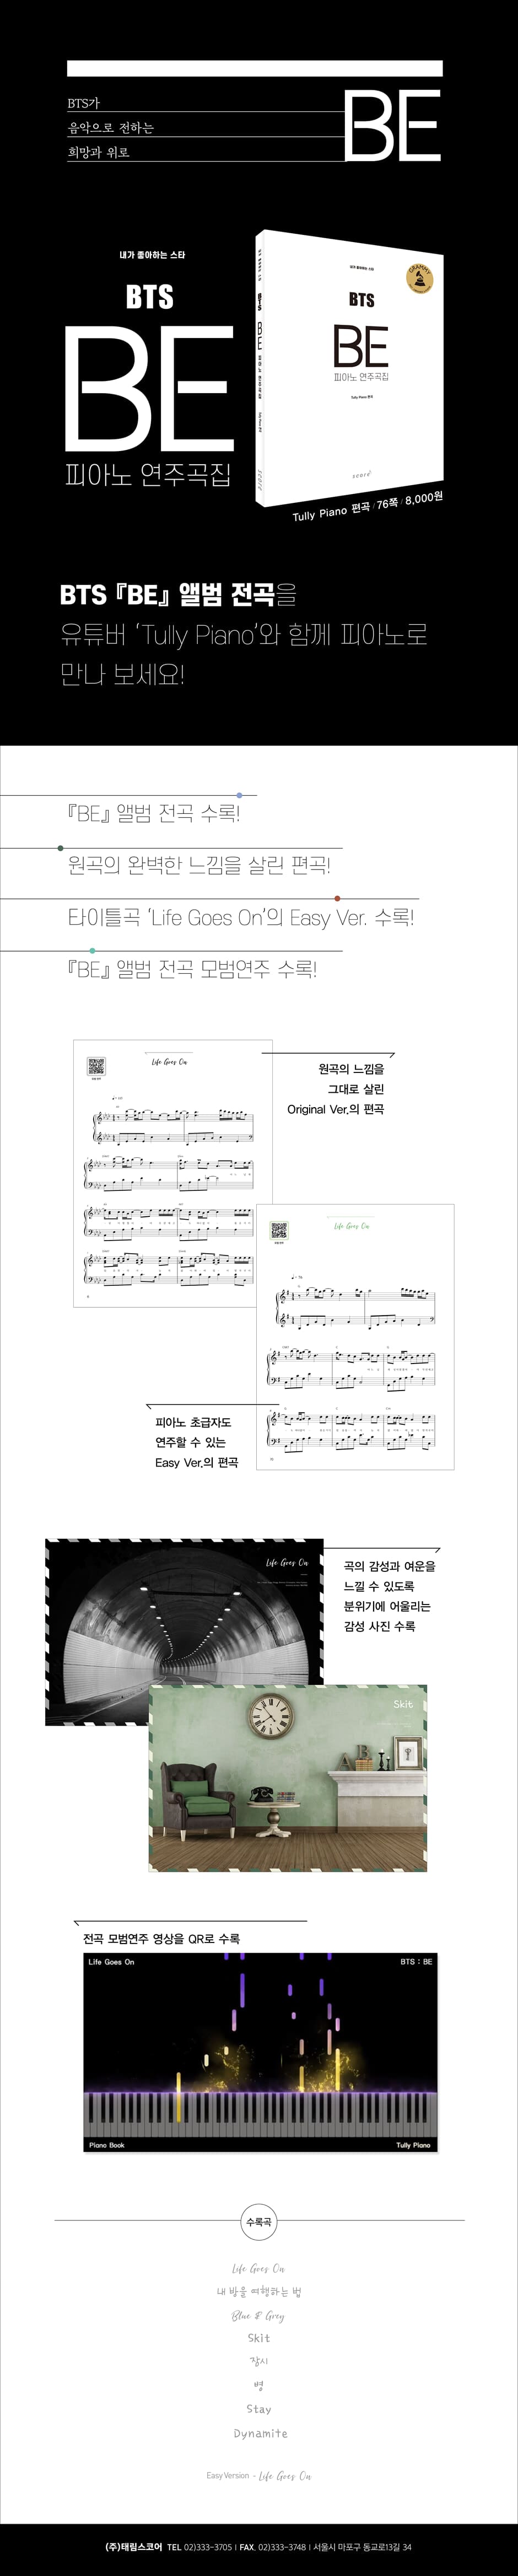 BTS - BE PIANO SCORE BOOK